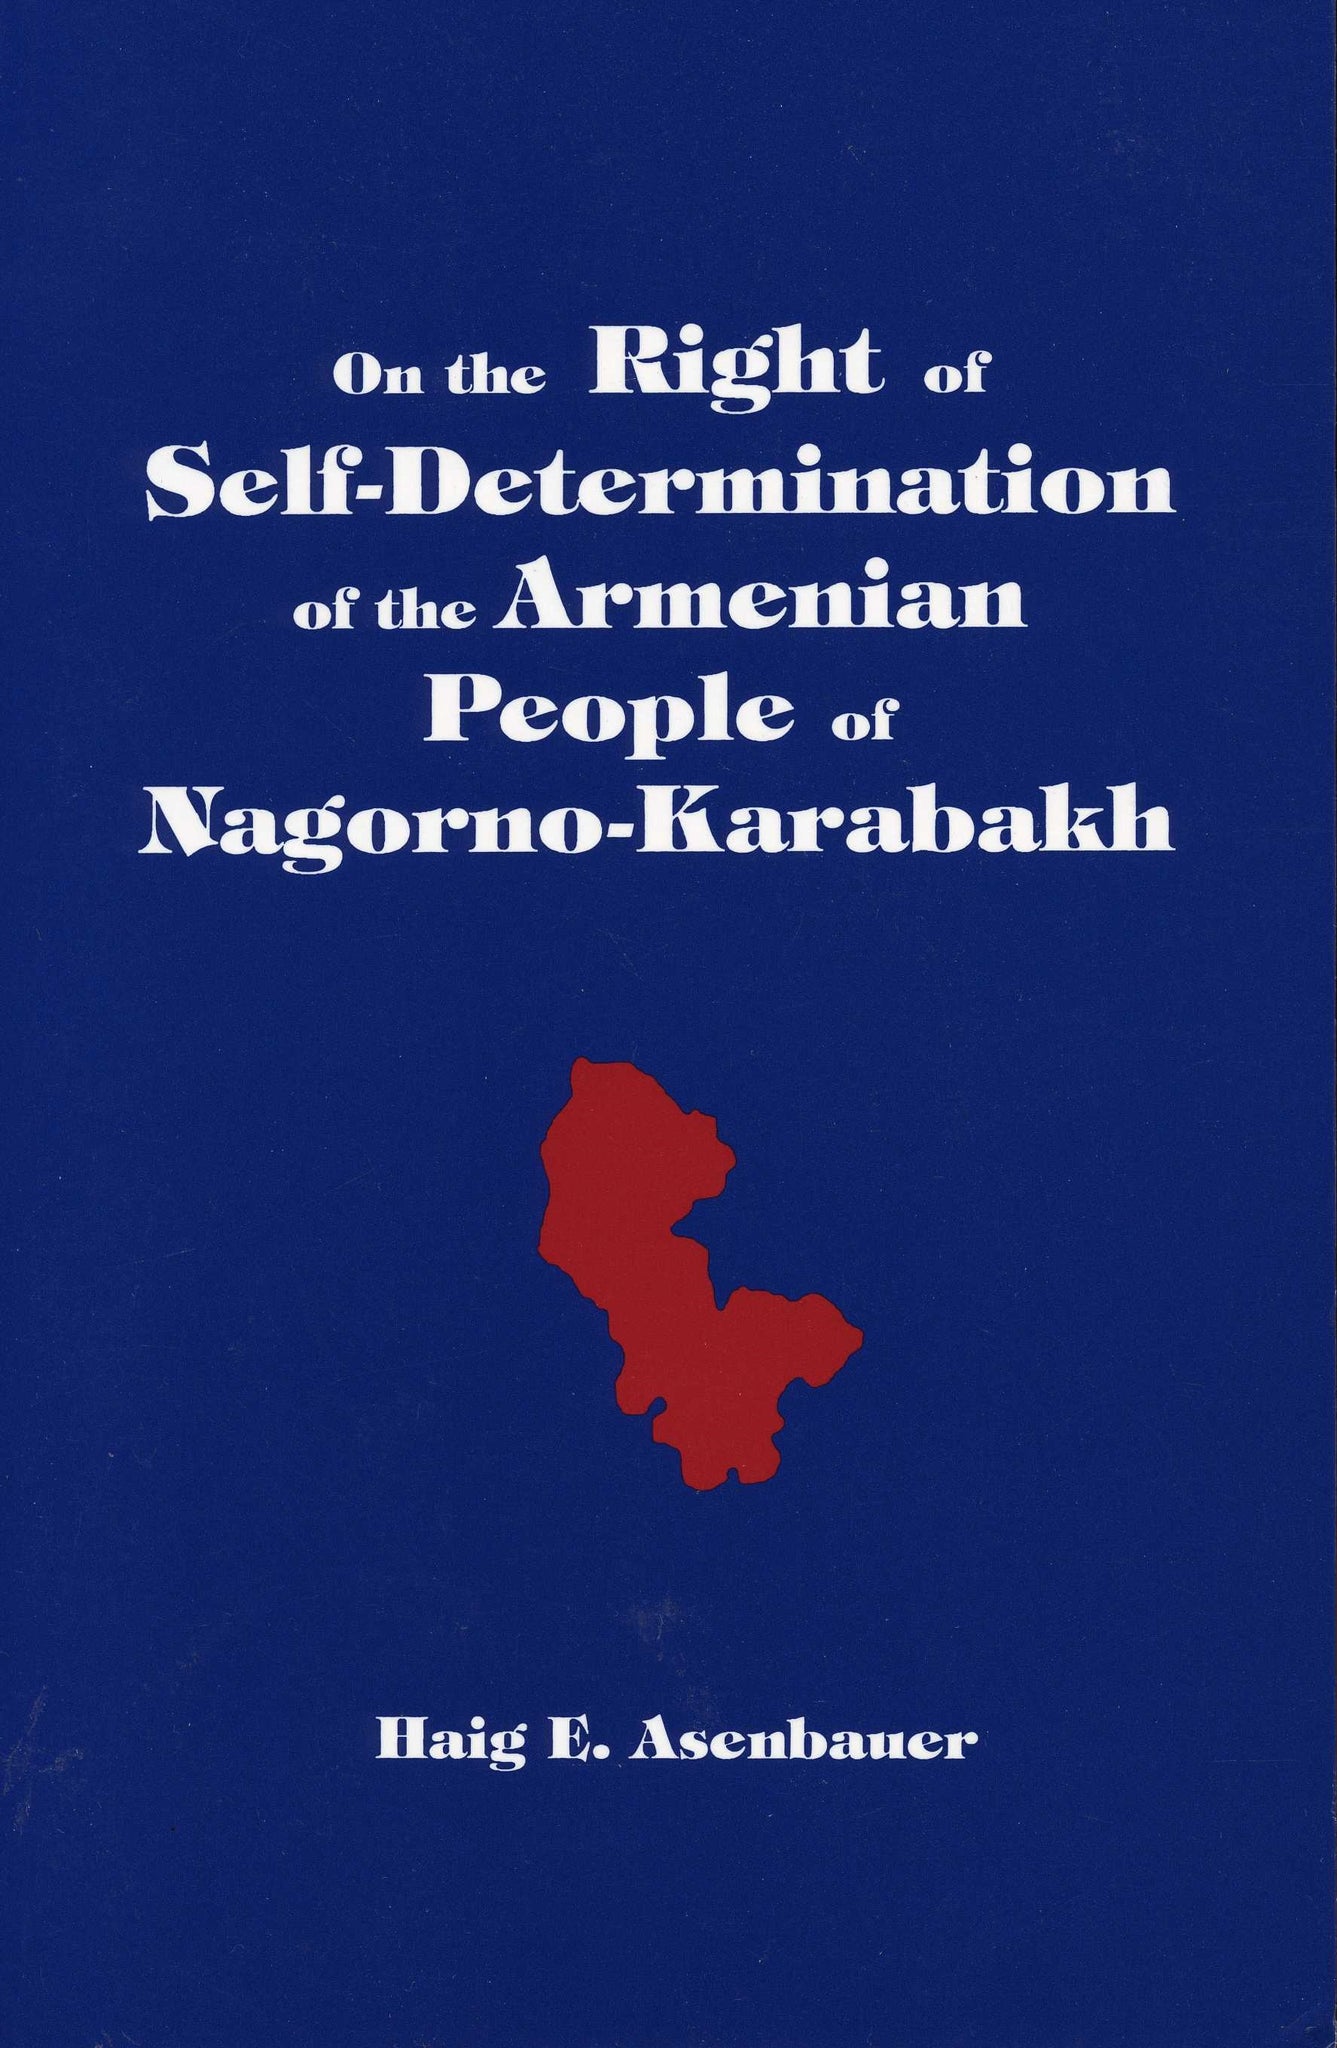 ON THE RIGHT OF SELF-DETERMINATION of the Armenian People of Nagorno-Karabakh